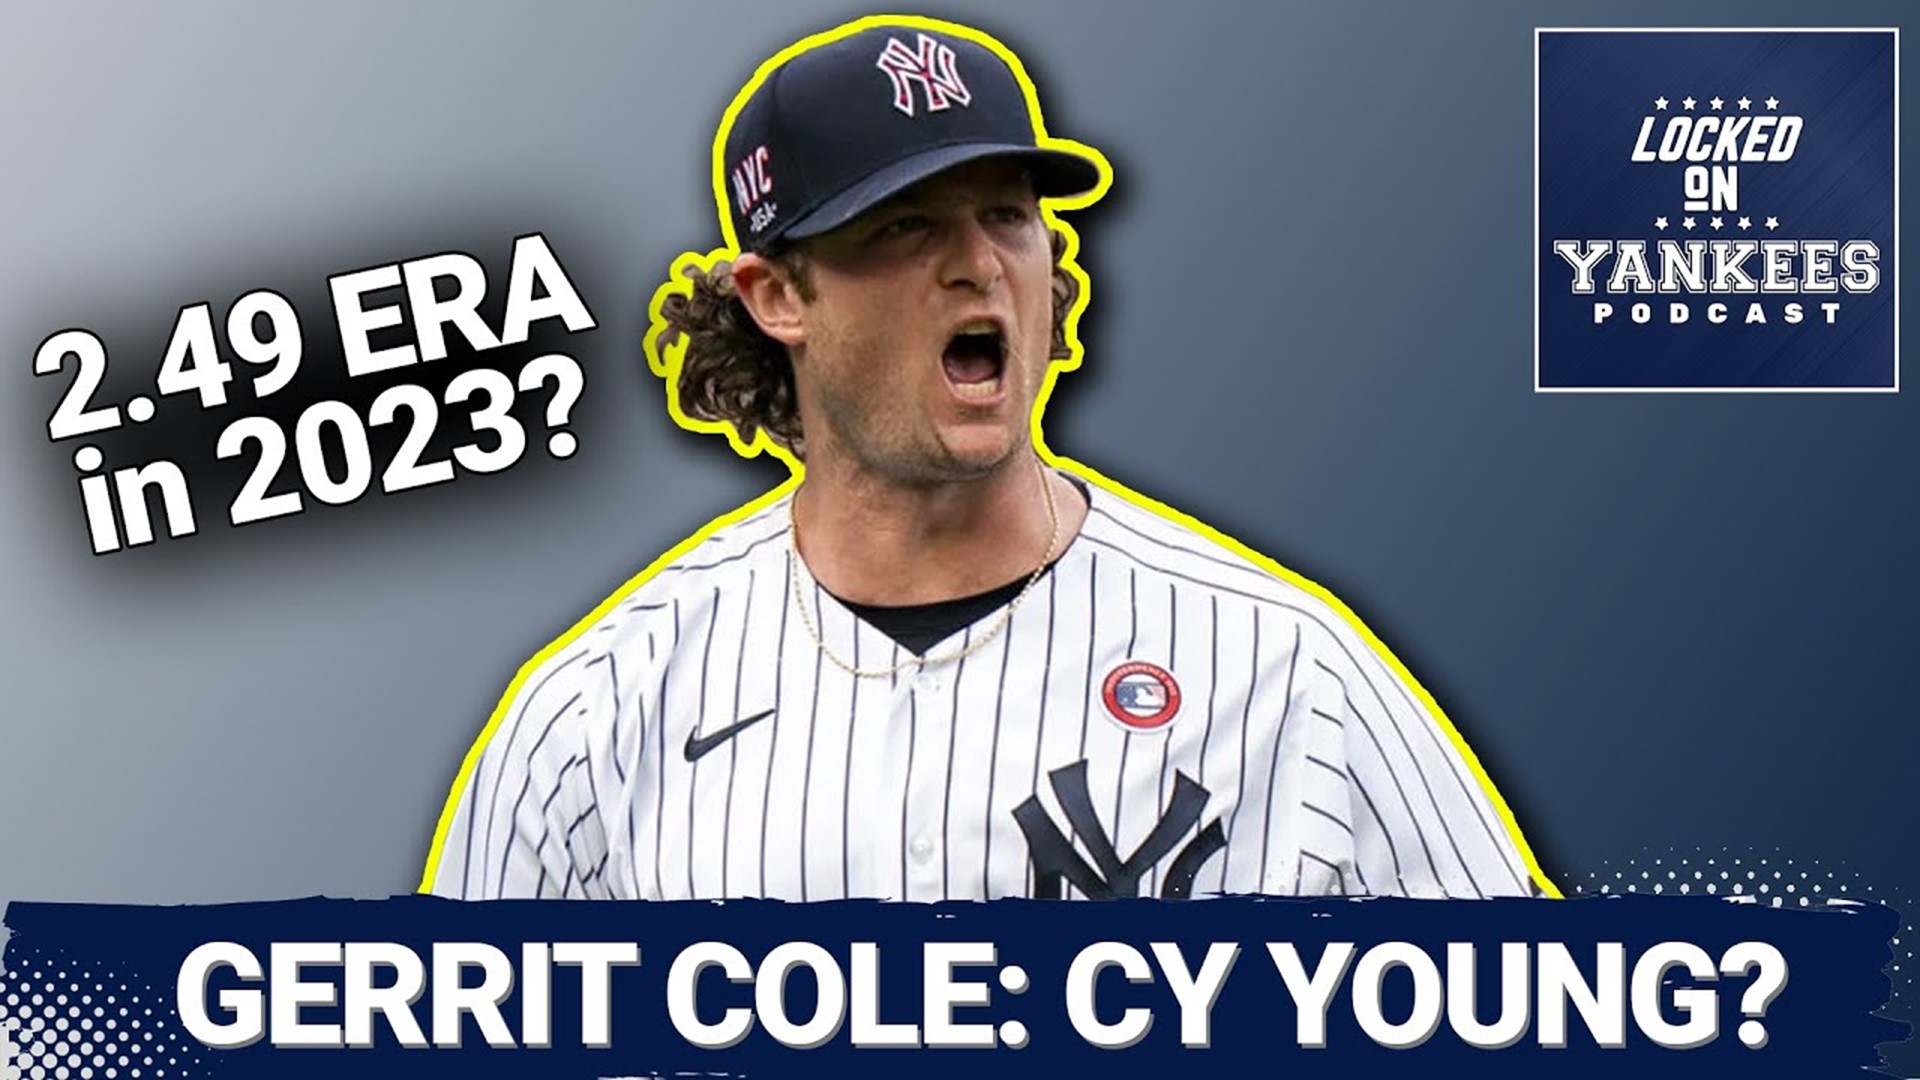 Gerrit Cole has quietly become one of the best starting pitchers in baseball. The New York Yankees ace has been the most consistent starter in the game since 2018.